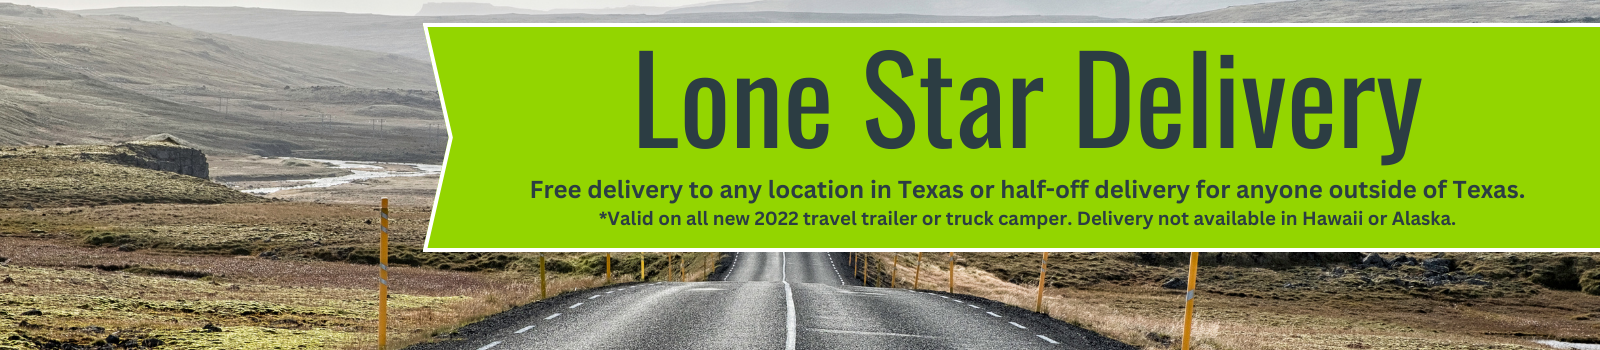 Lone Star Delivery Promotion Banner image